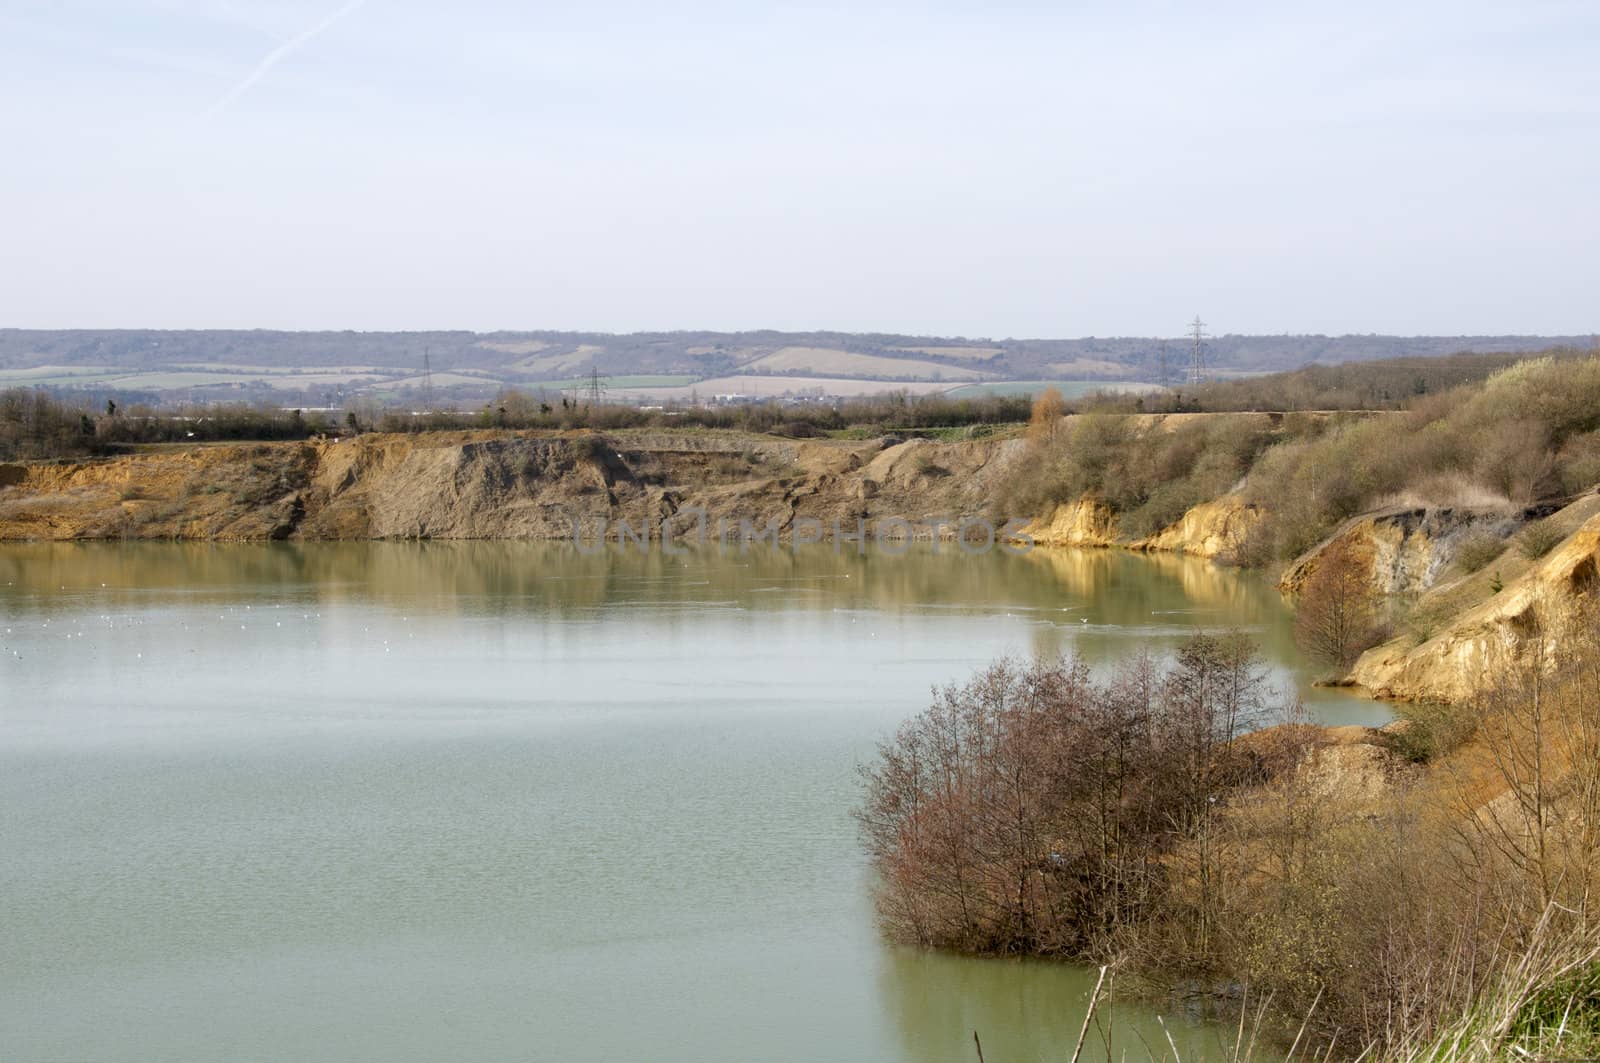 A view of a lack at a quarry